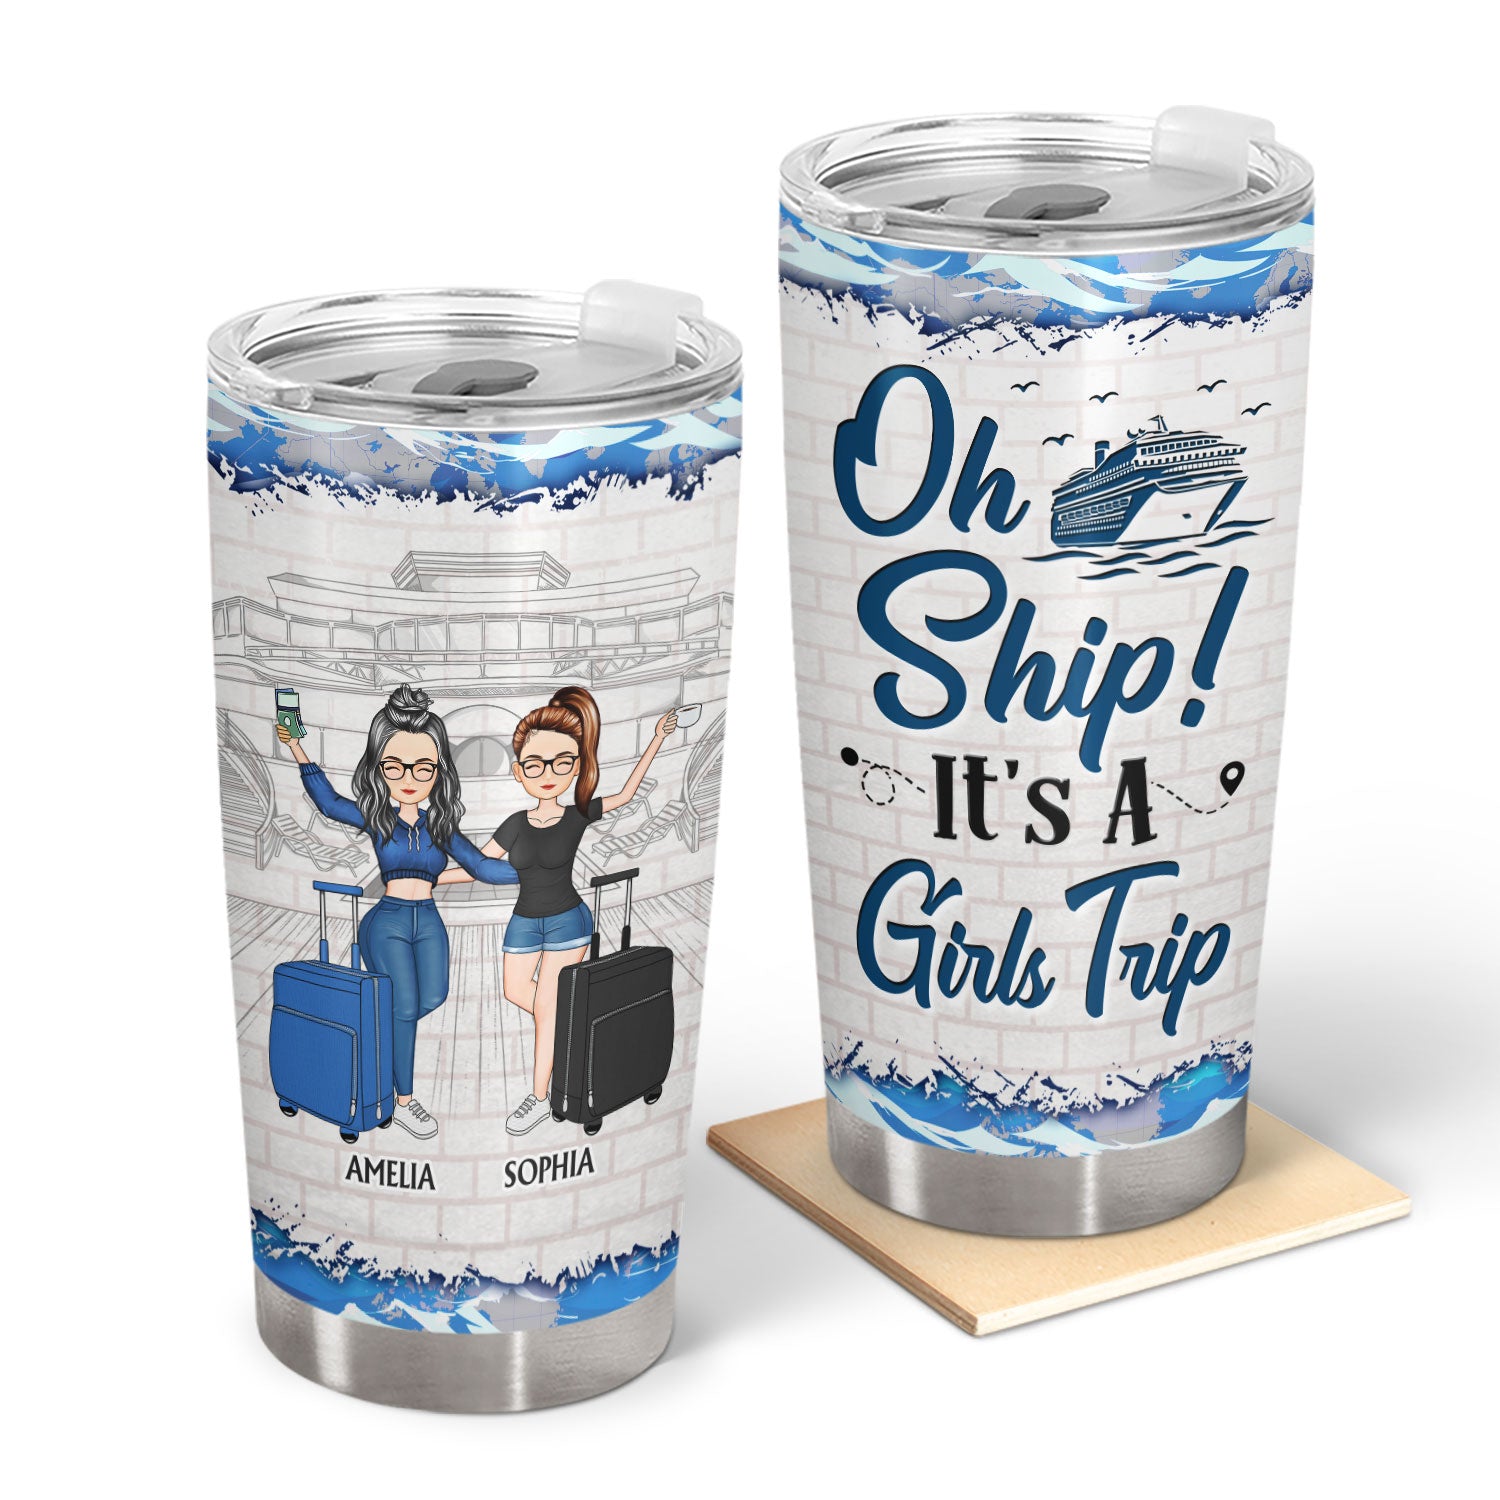 Best Friends Oh Ship! It's A Girls trip - Gift For Travel Lovers - Personalized Custom Tumbler